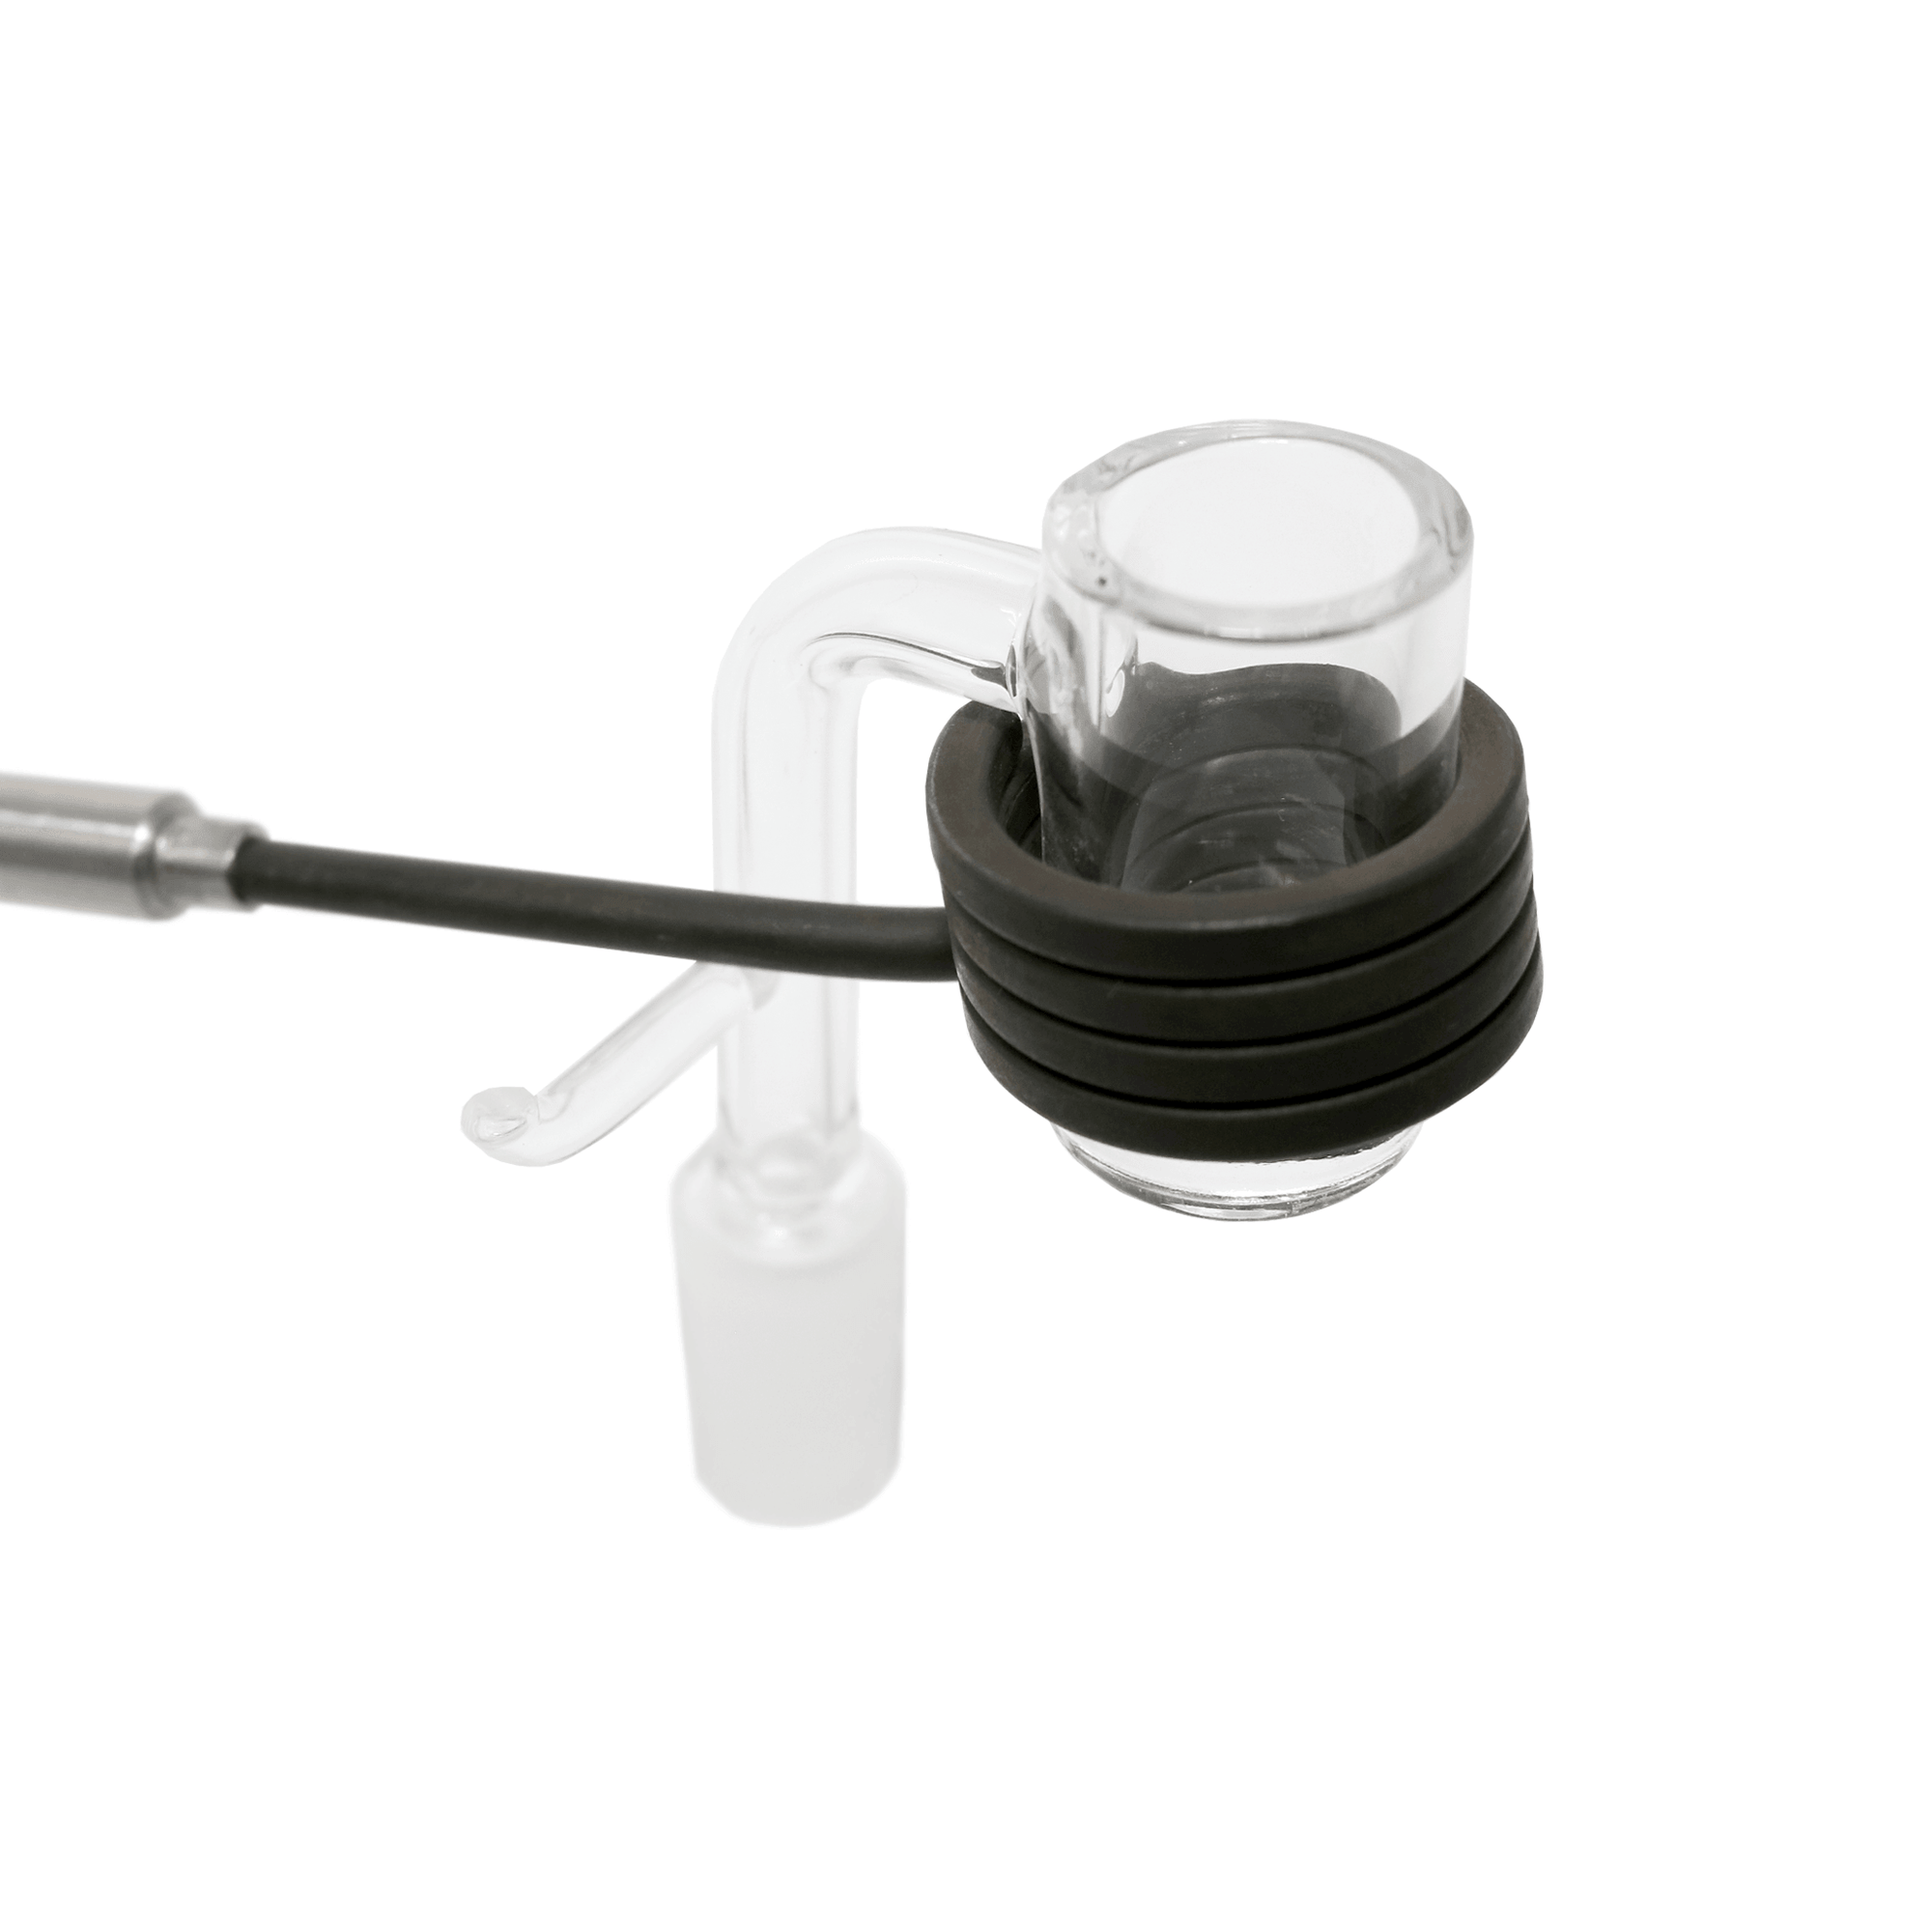 14mm Male Quartz E-Banger for 20mm Coil With Saucer Cap | Full View | the dabbing specialists